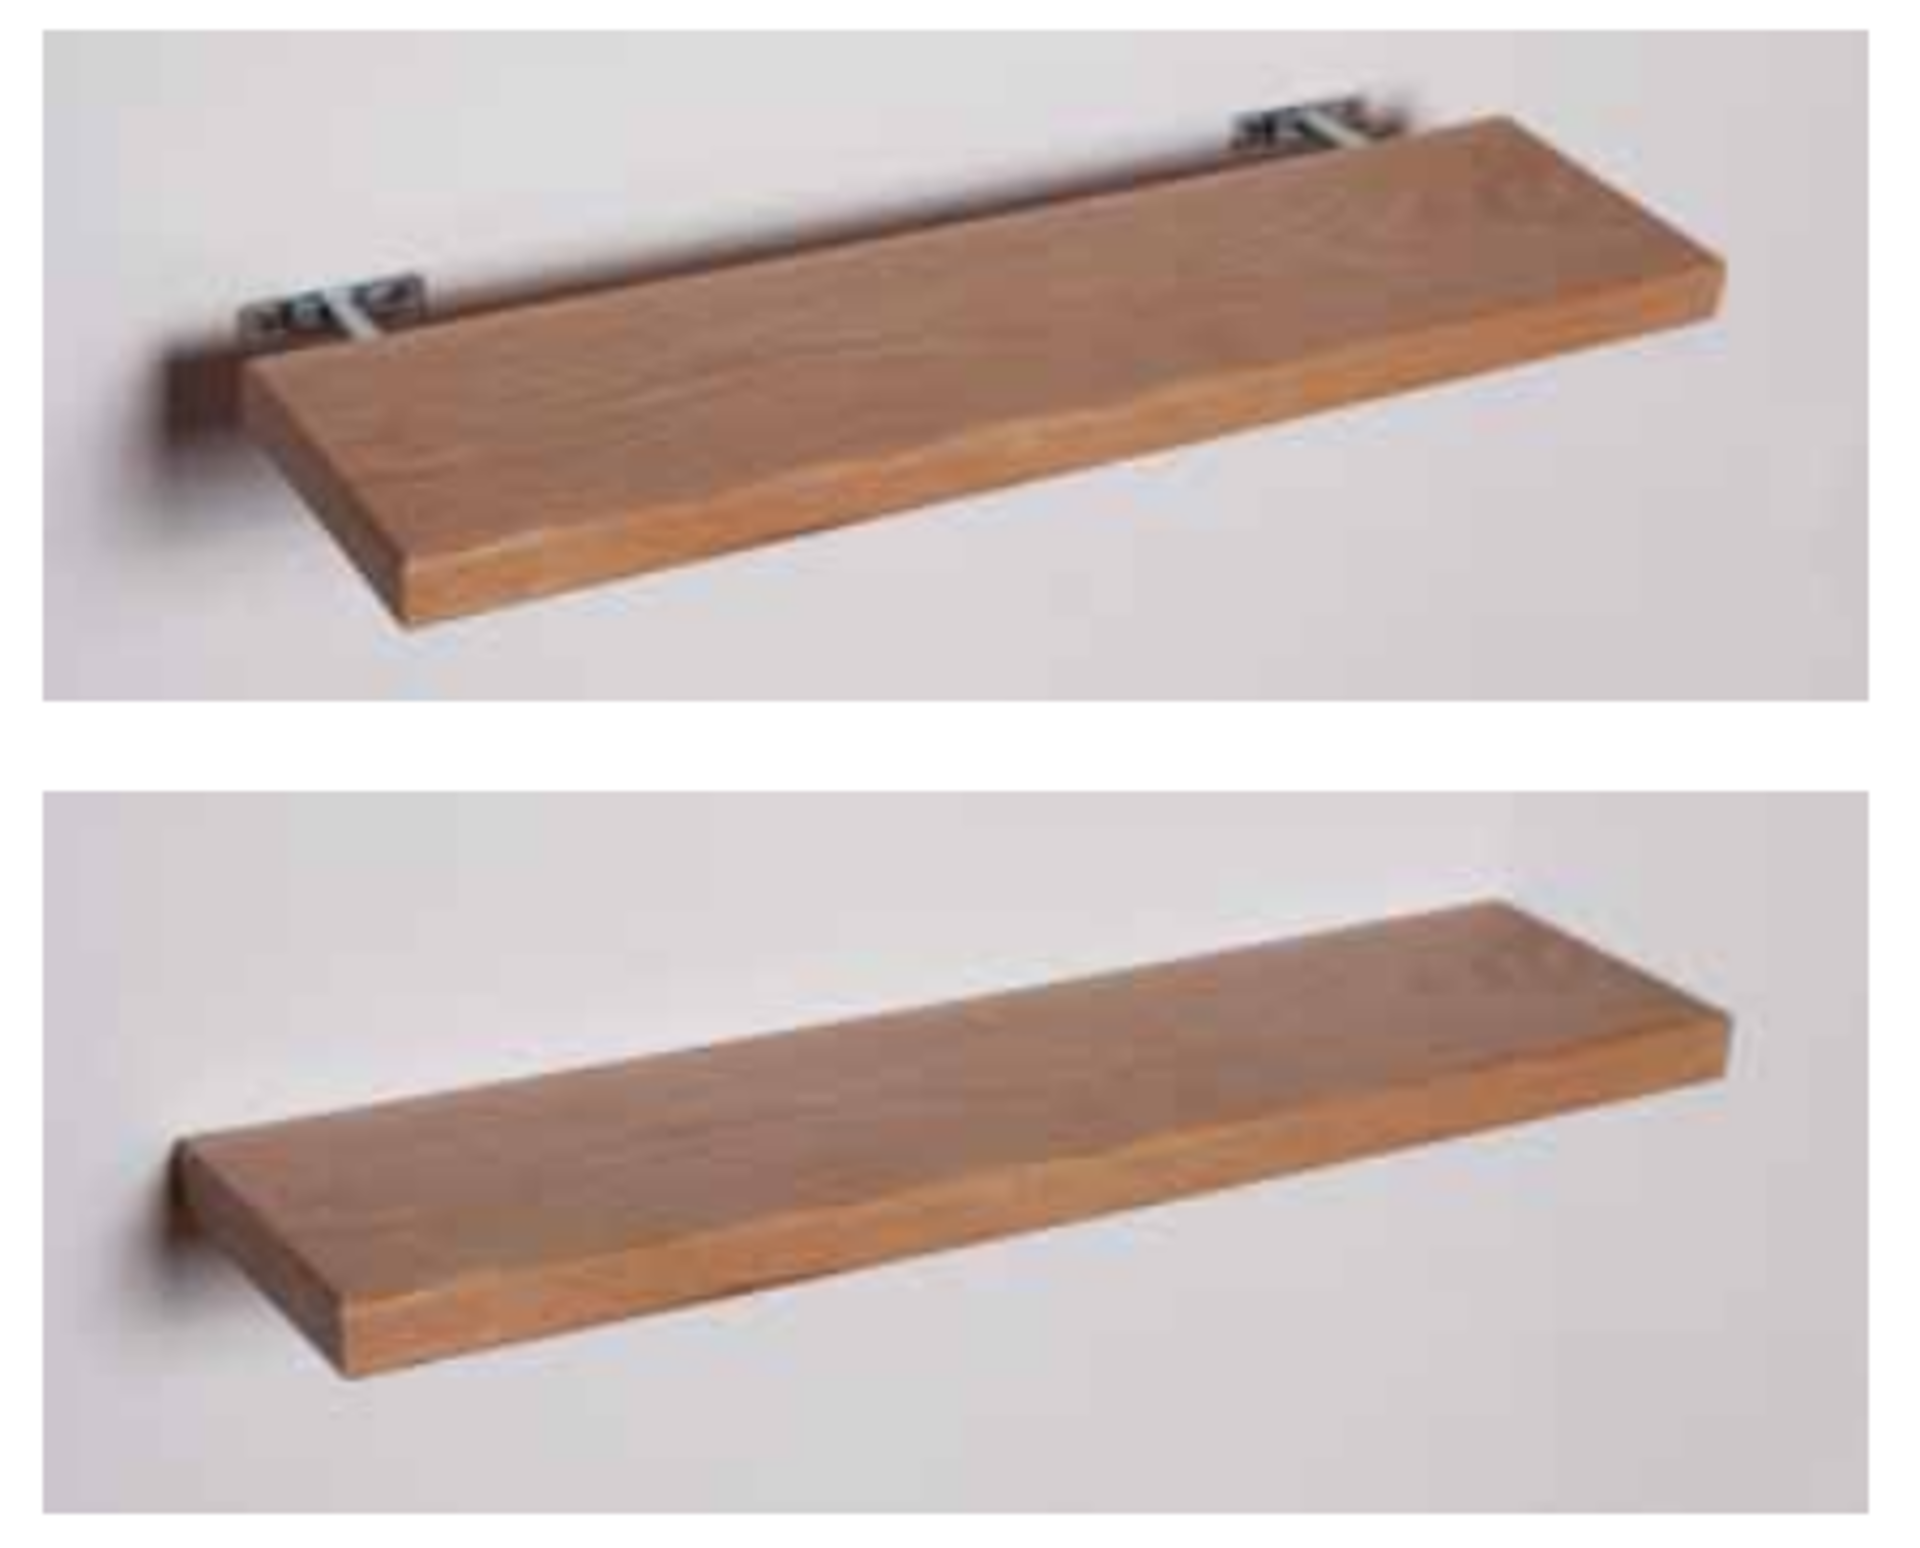 1 x Stonearth Extra Large Bathroom Storage Shelf With Concealed Brackets - American Solid WALNUT - Image 2 of 12